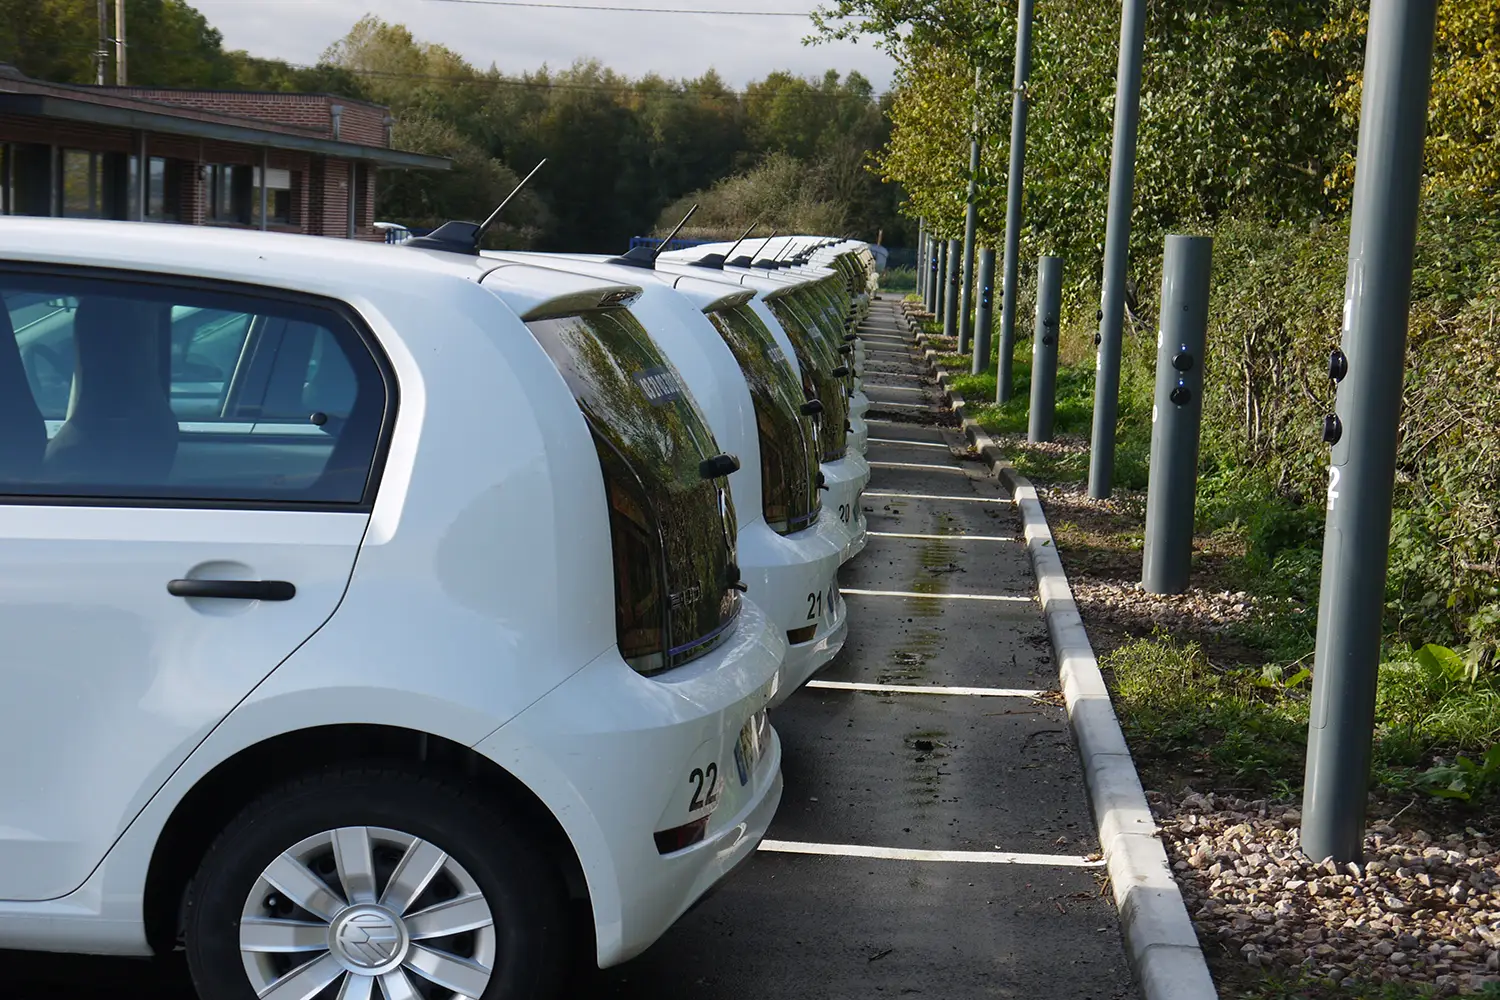 Several EVs are charging at ubitricity lamppost charge points in France.